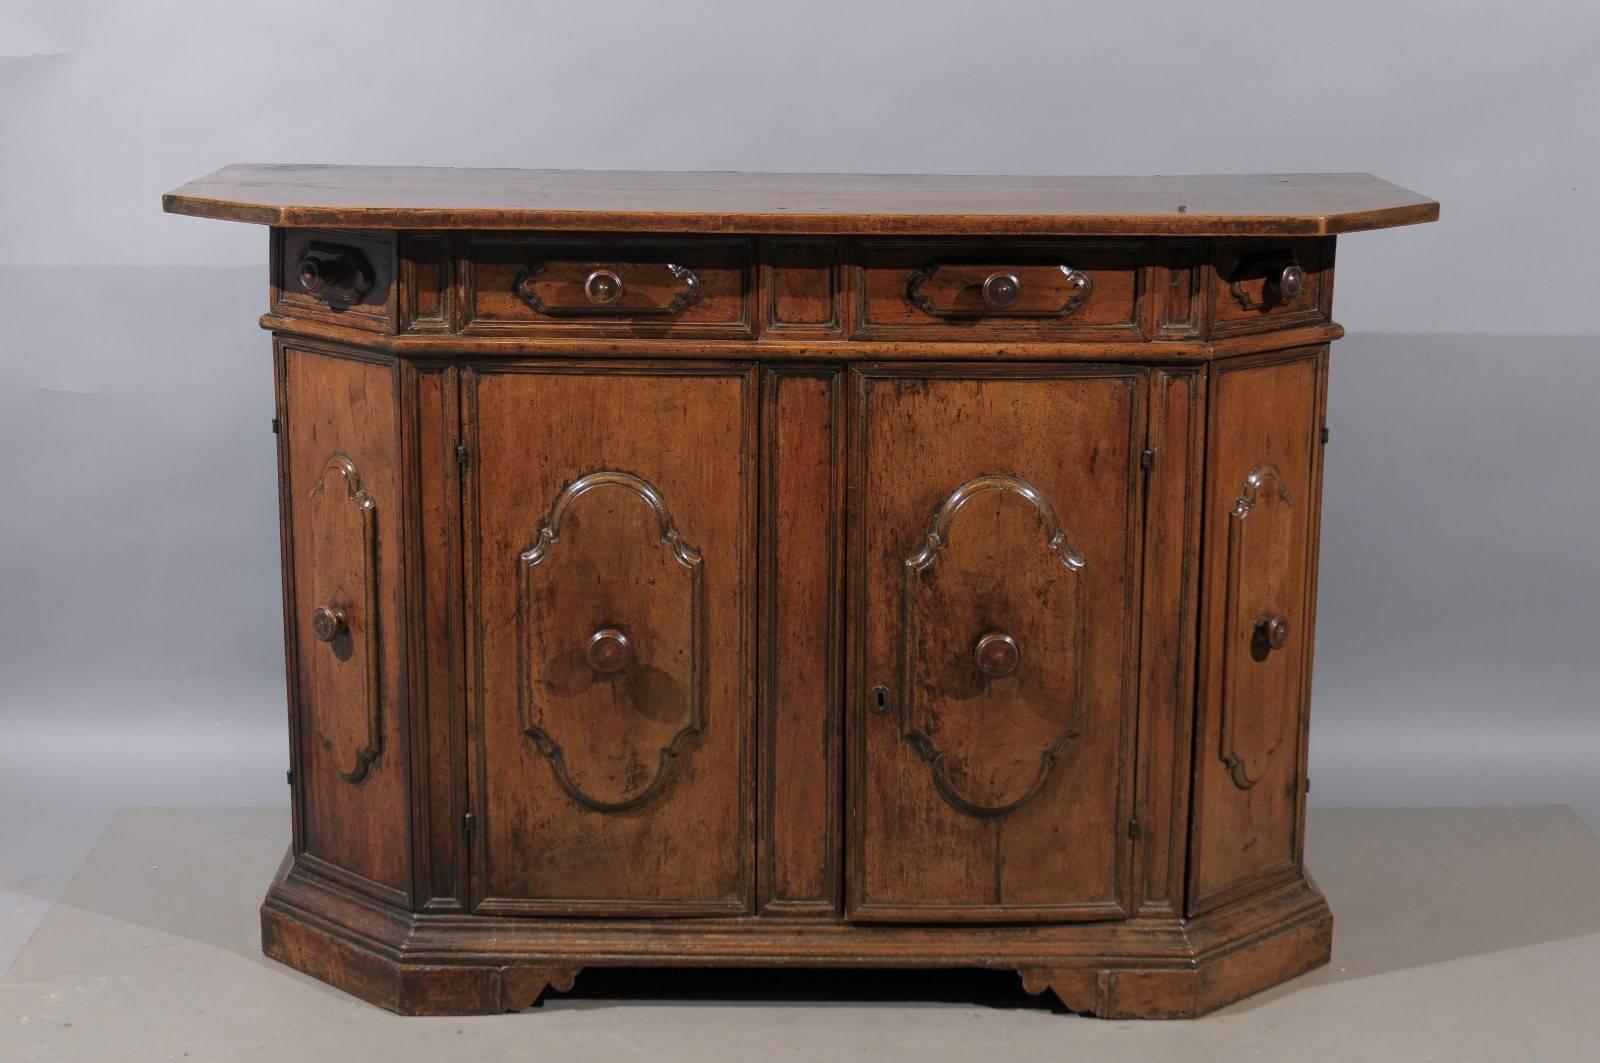 Large 17th century walnut credenza with four drawers and cabinet doors below with raised panels, Italy.